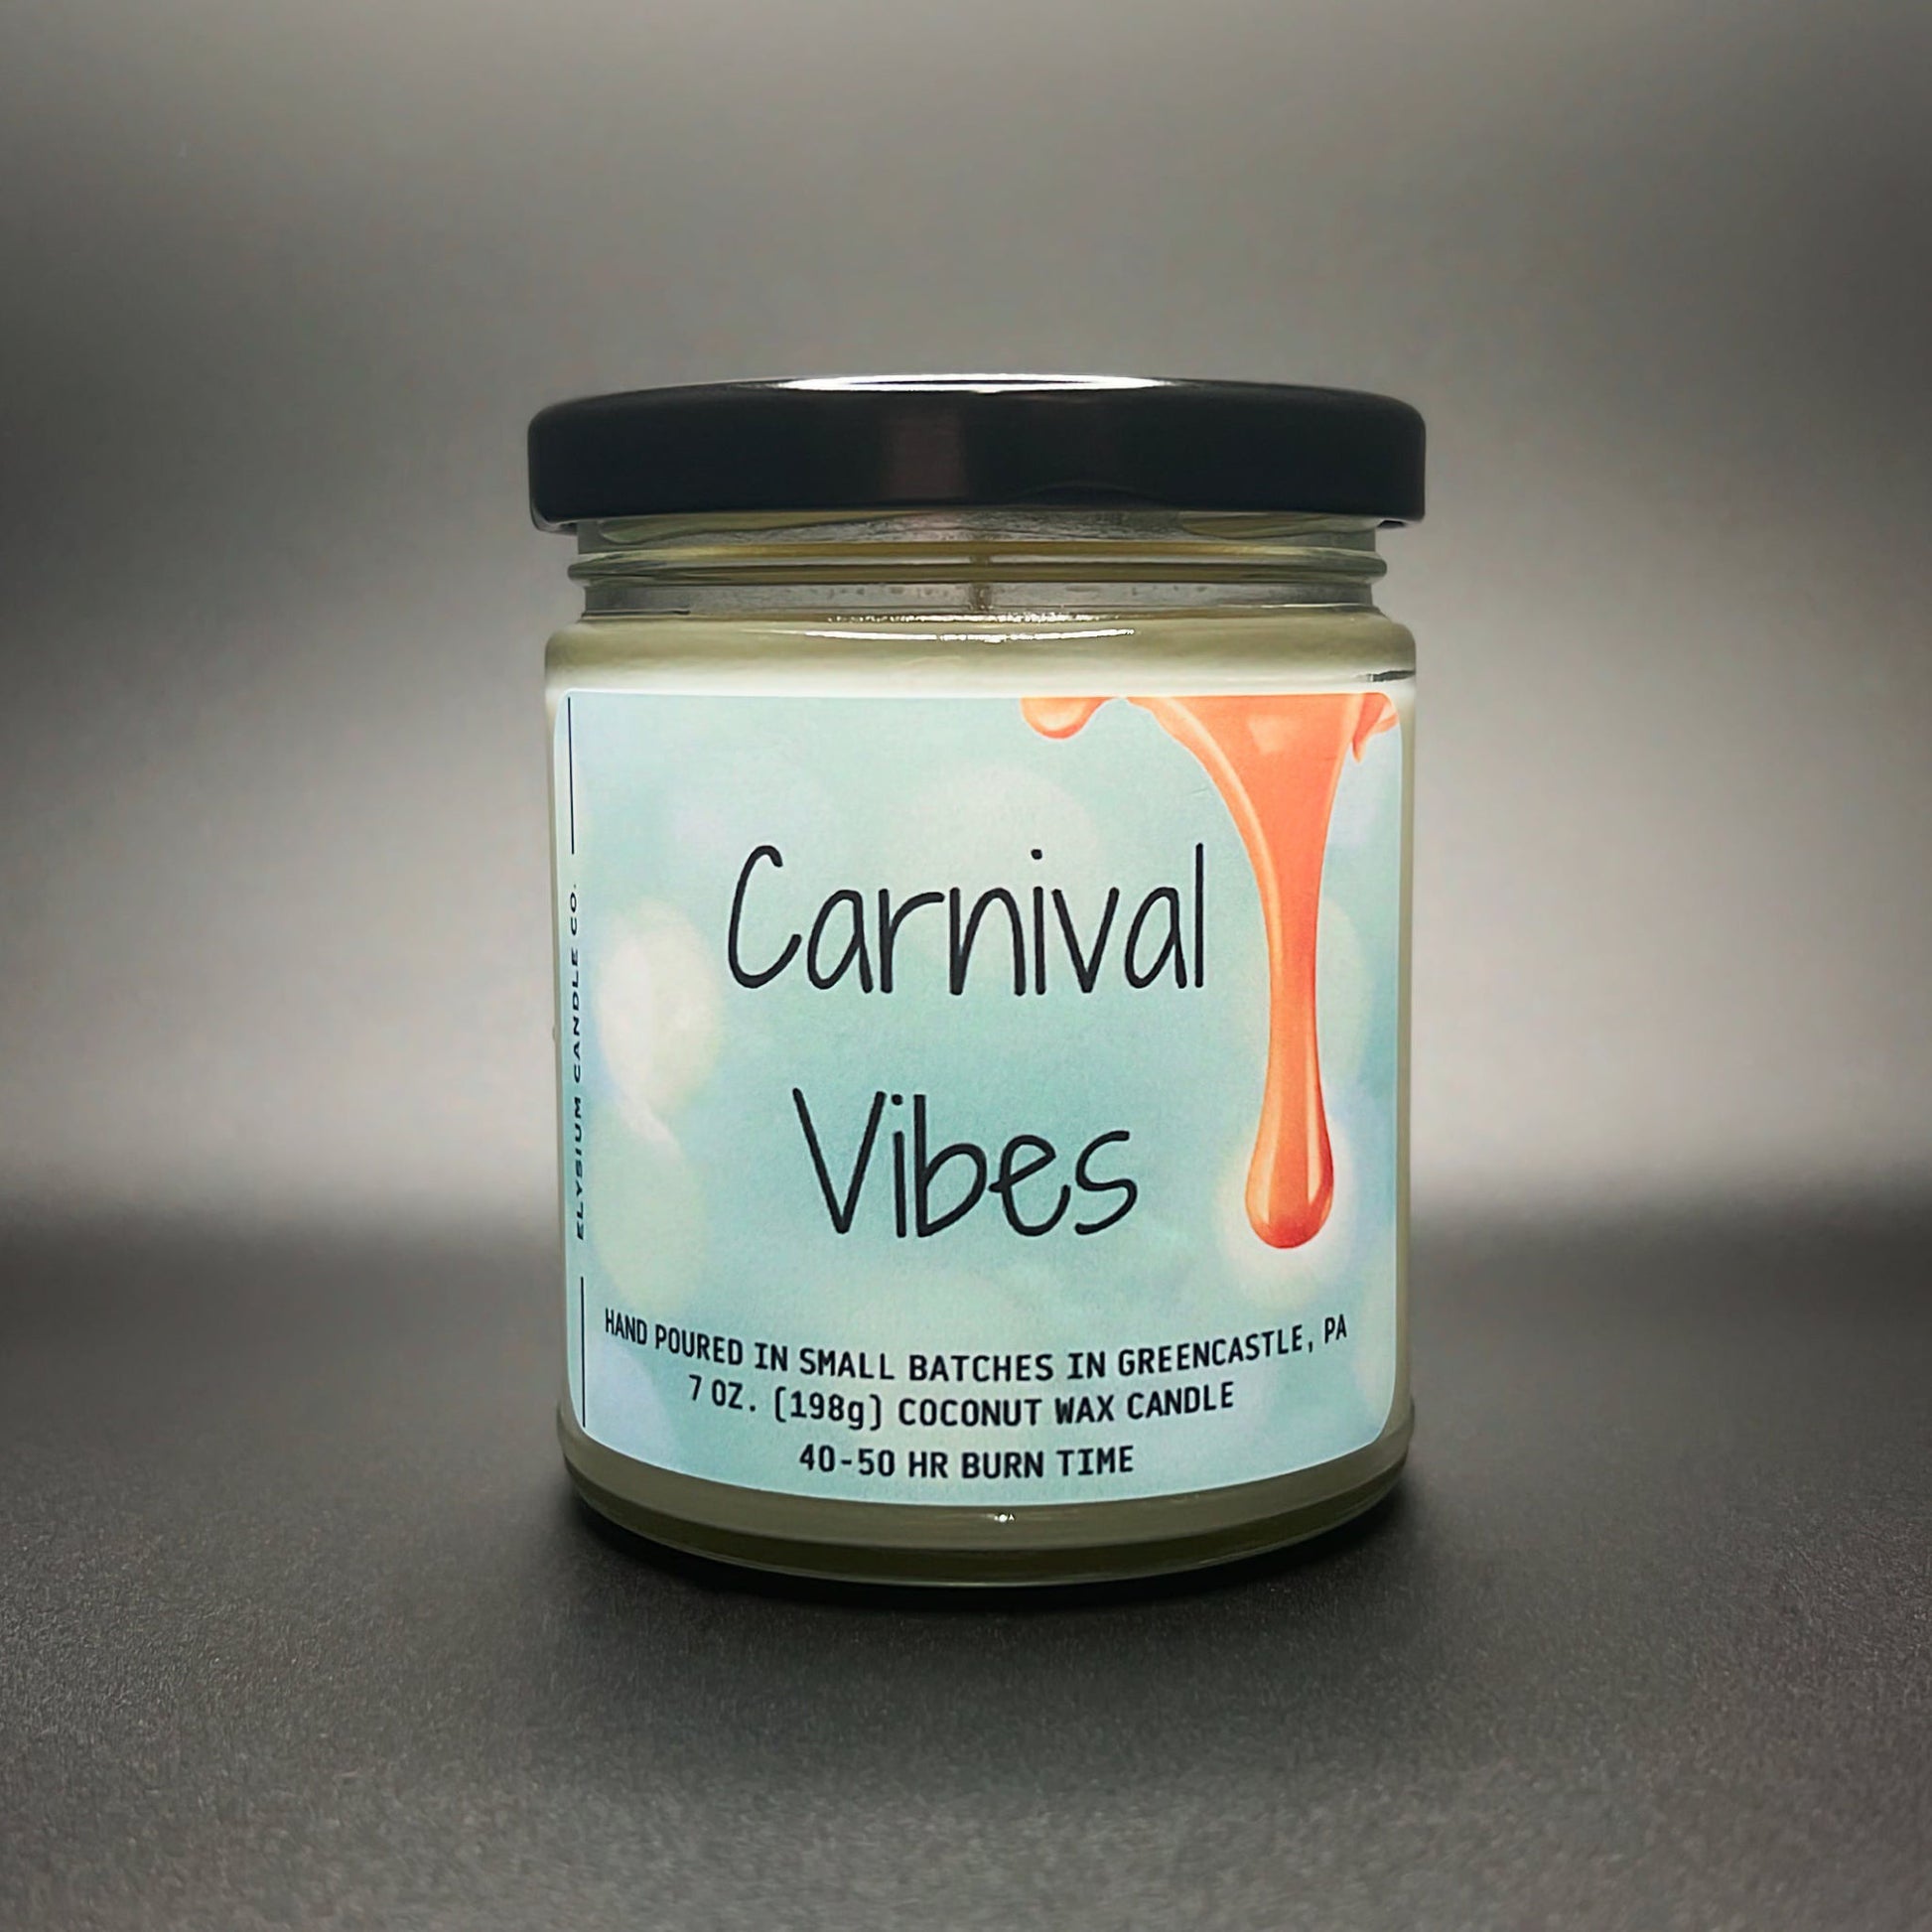 Front view of Carnival Vibes coconut soy wax candle by Elysium Candle Co with 40-50 hour burn time label.